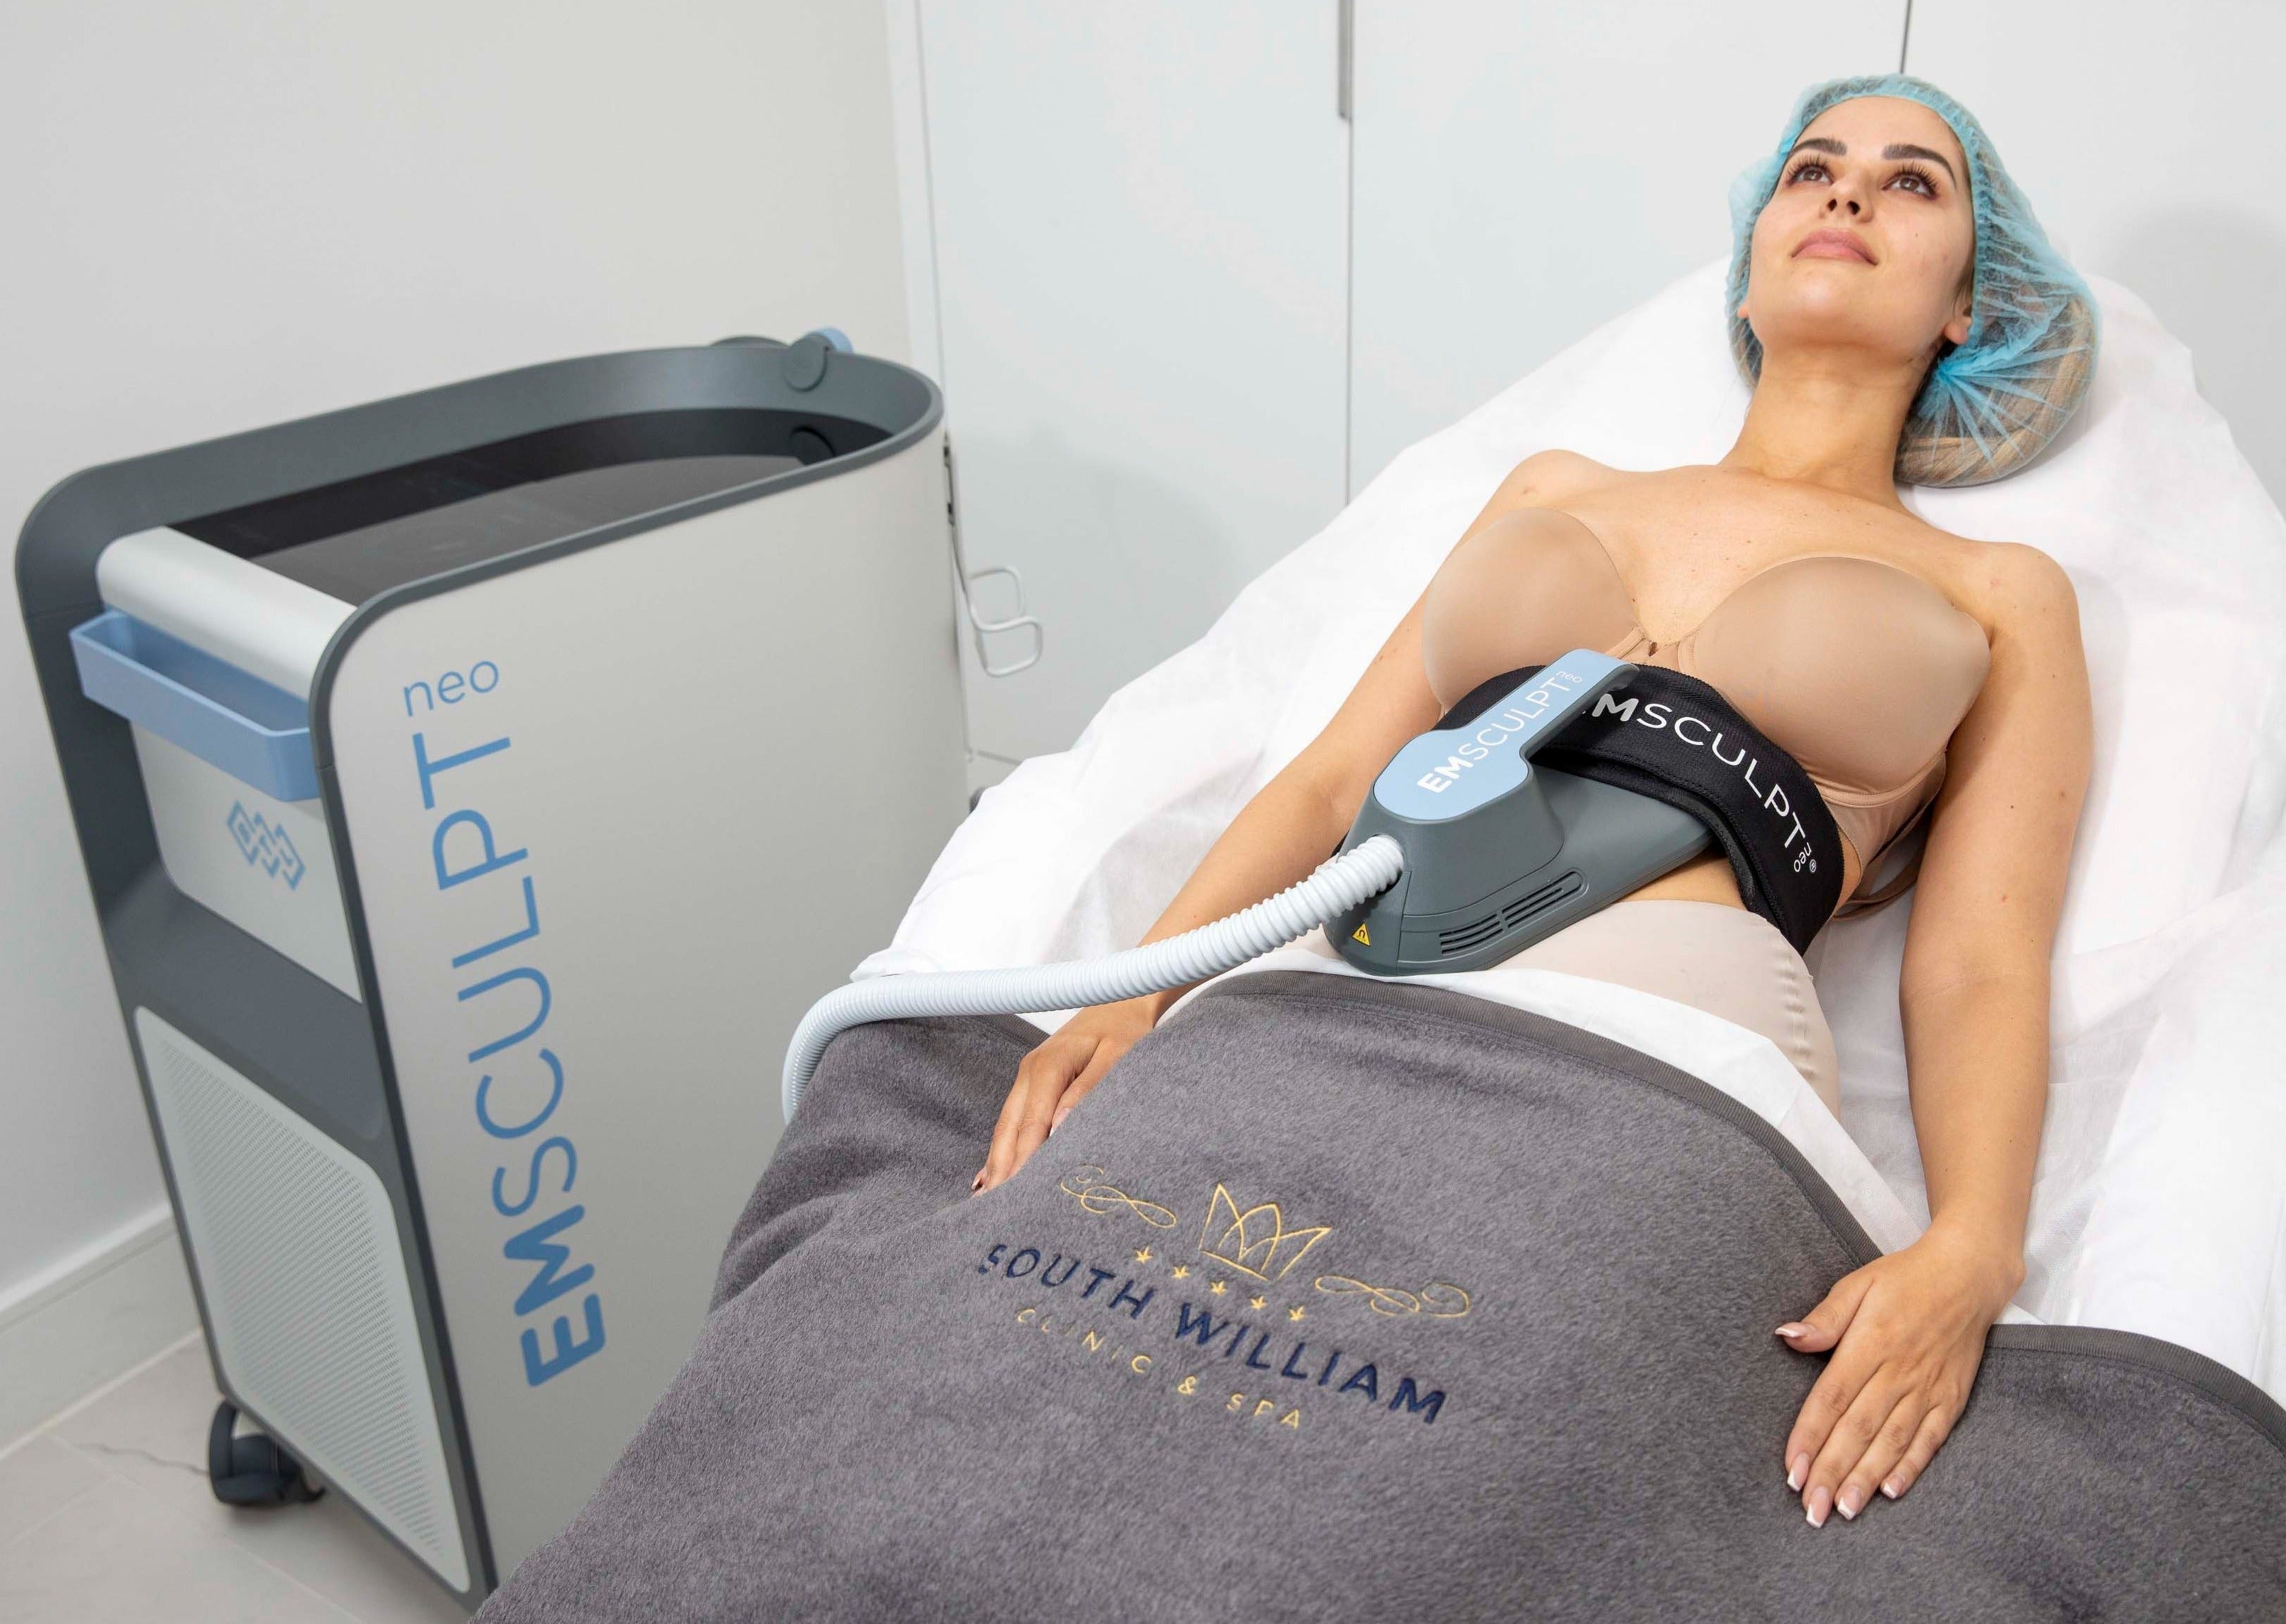 EmSculpt NEO Muscle Building & Fat Burning course of 6 or 8 (as low as €350 per session)